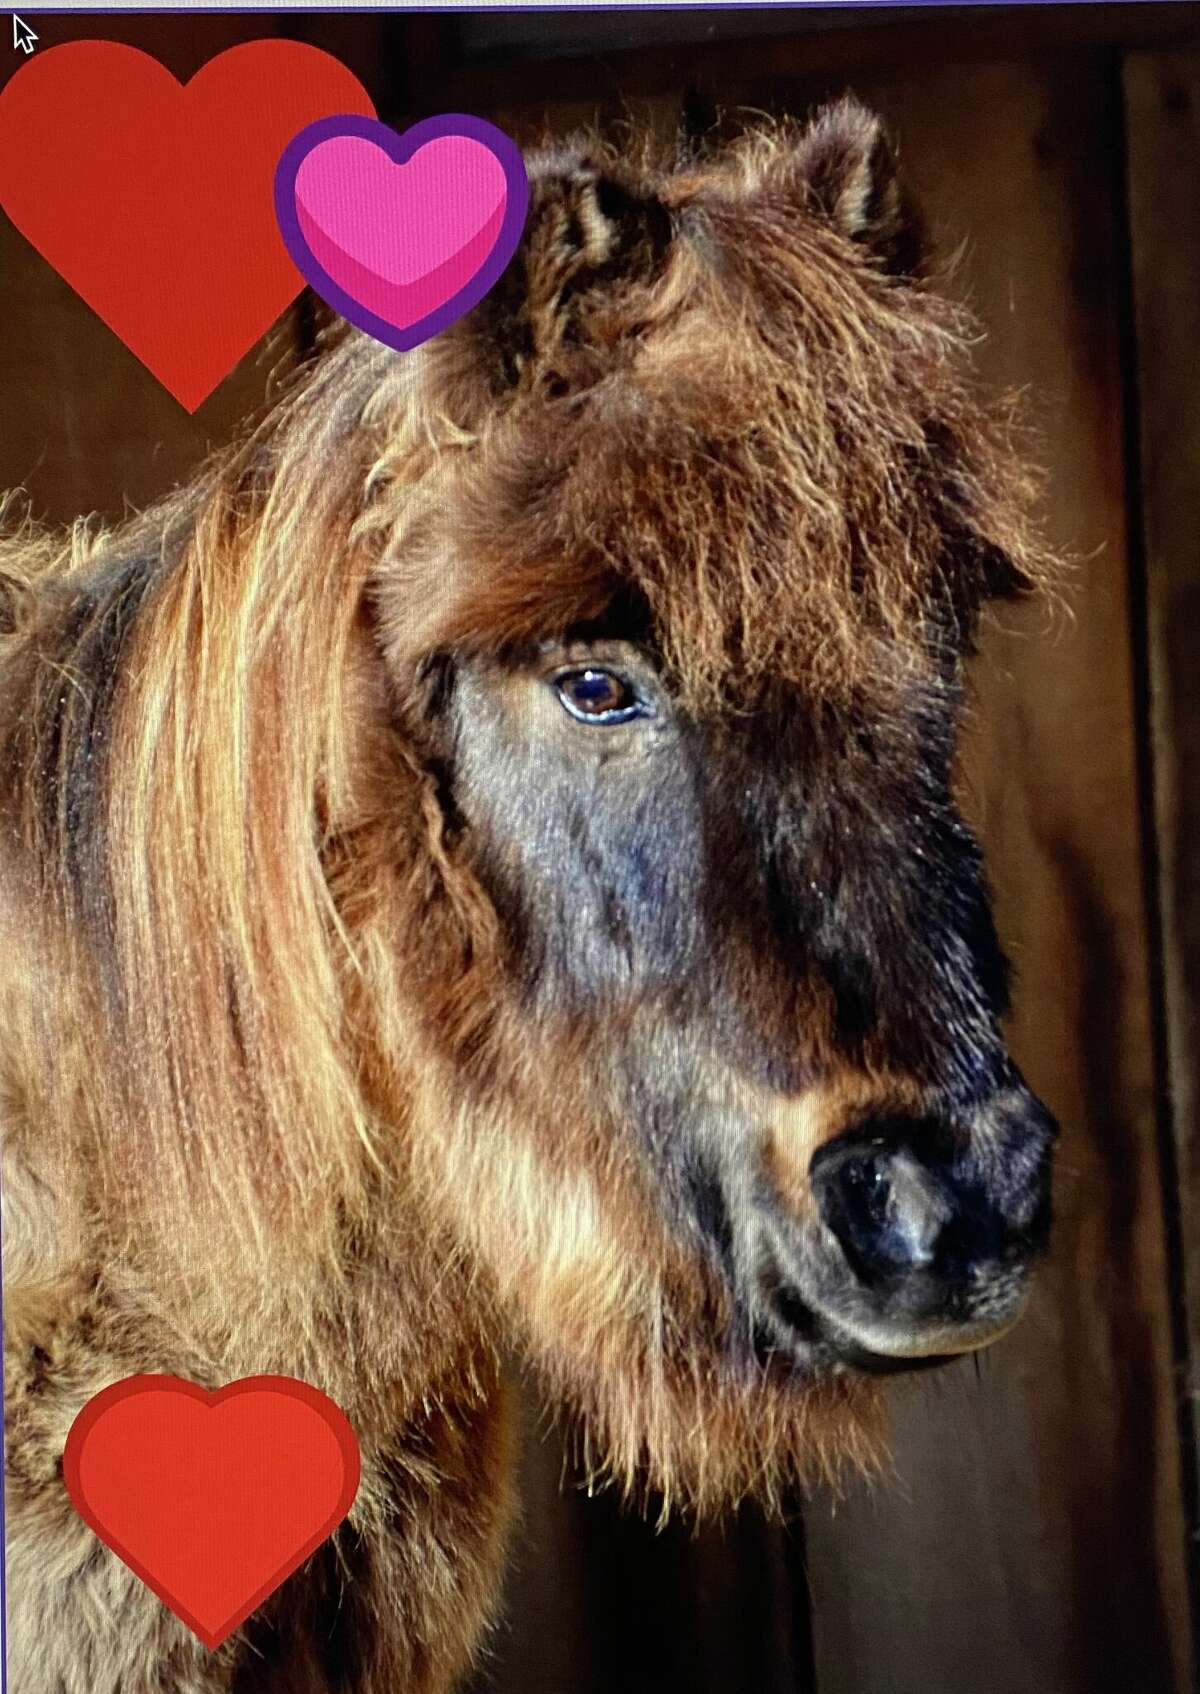 Washington's HORSE of Connecticut is holding a special Valentine's Day fundraiser at the farm, 43 Wilbur Road, Feb. 11-12. The event features tours, shopping, a bake sale and tack sale and a chance to meet the horses, including Prince, pictured. 